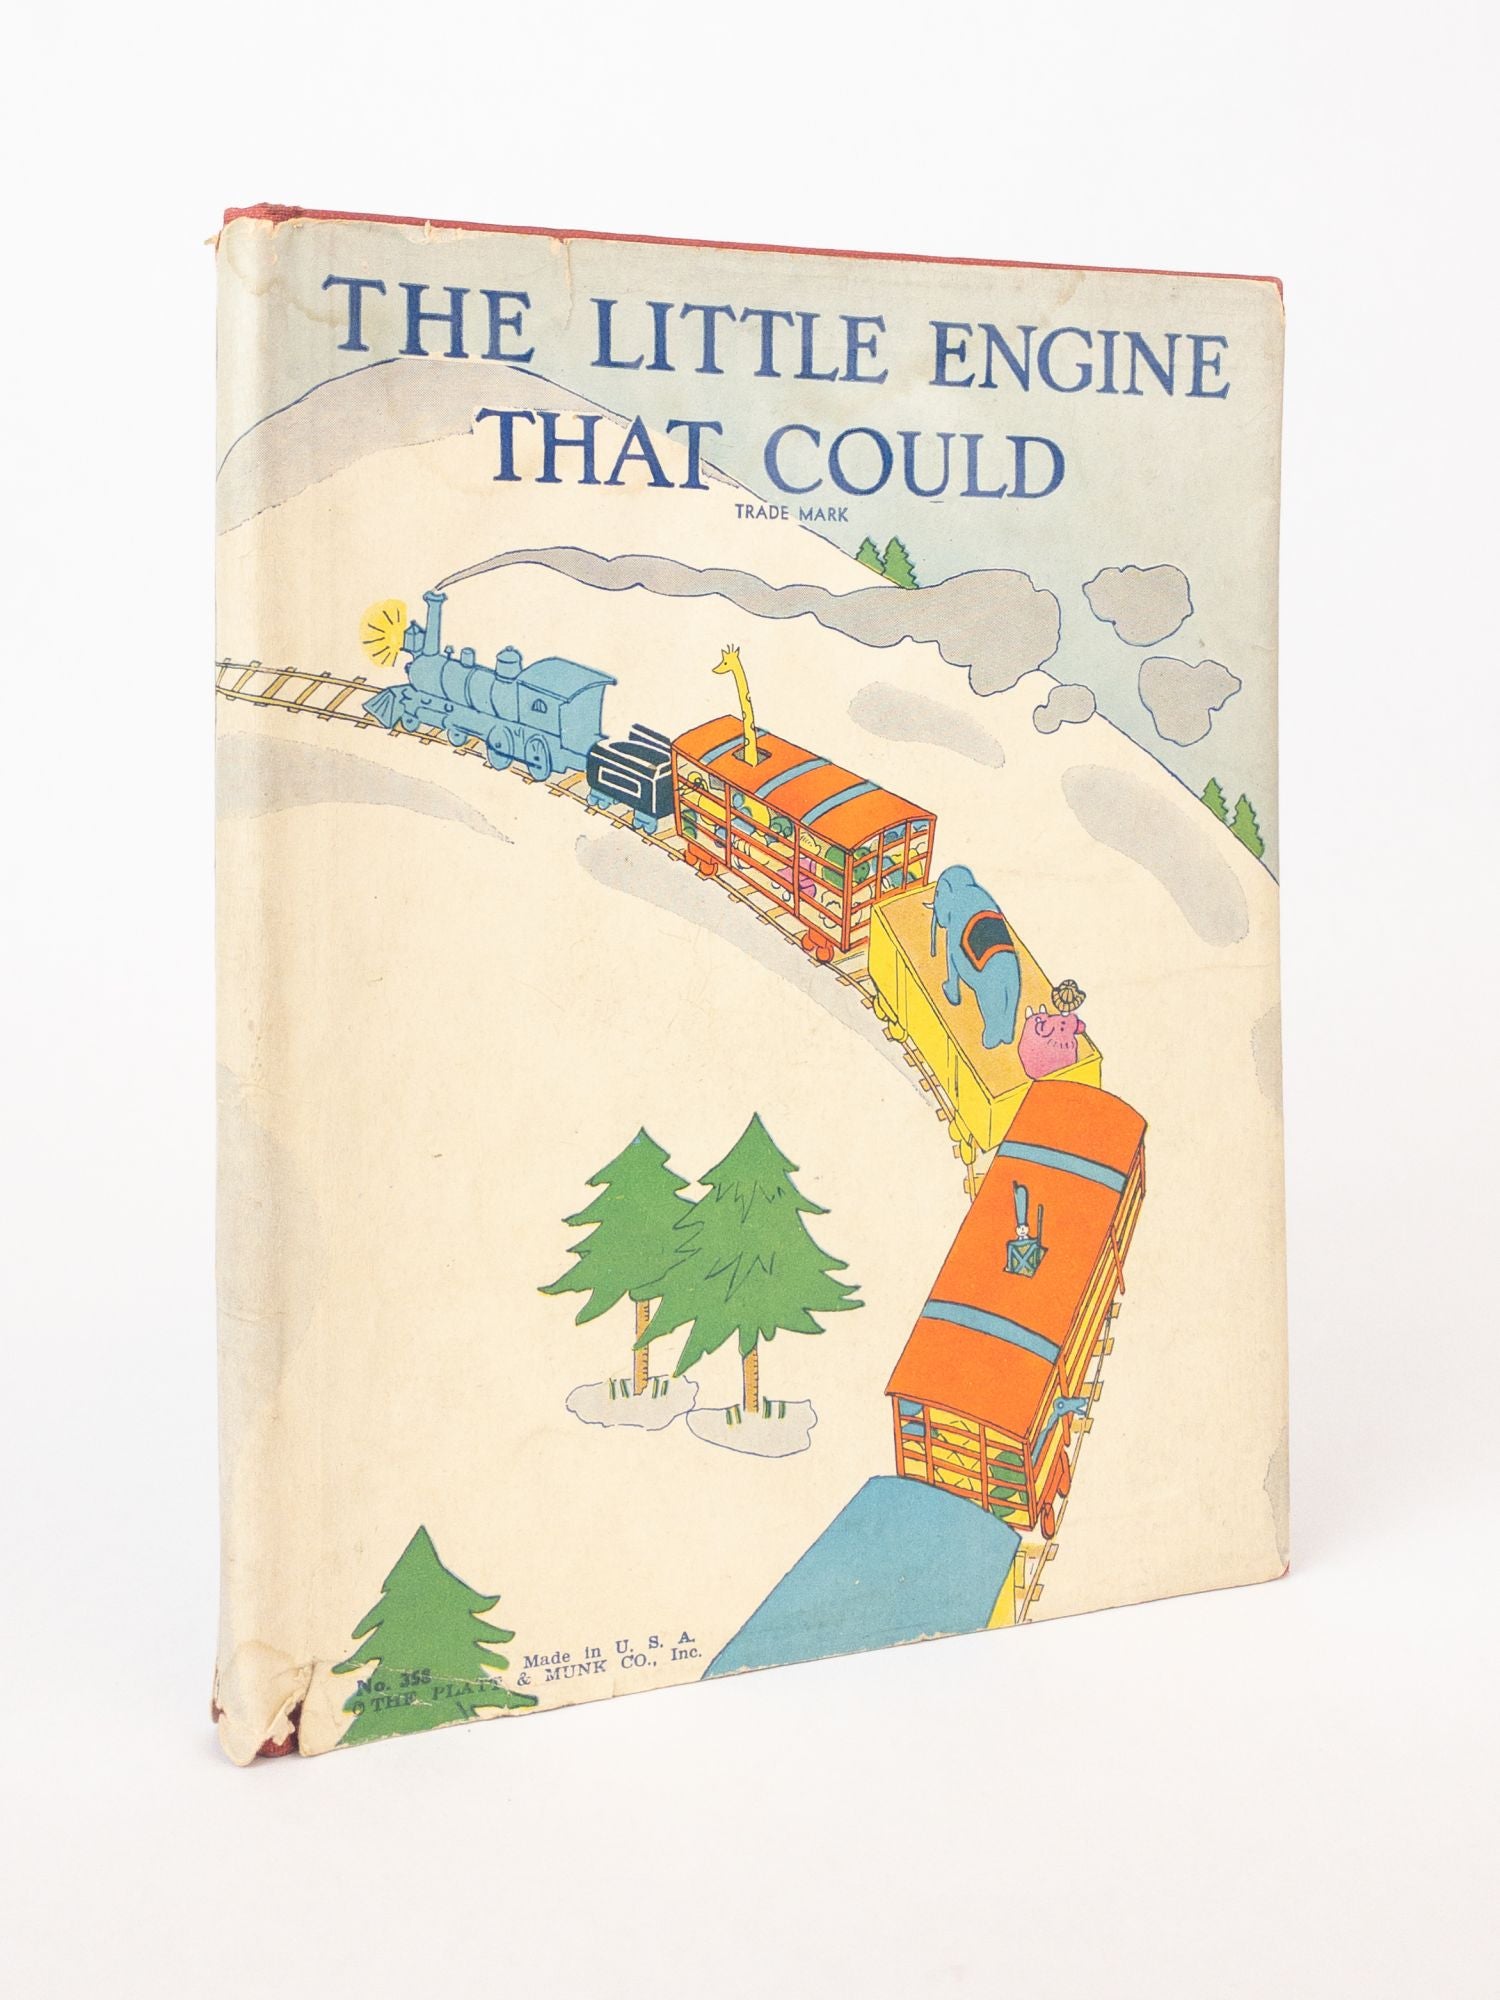 Product Image for THE LITTLE ENGINE THAT COULD